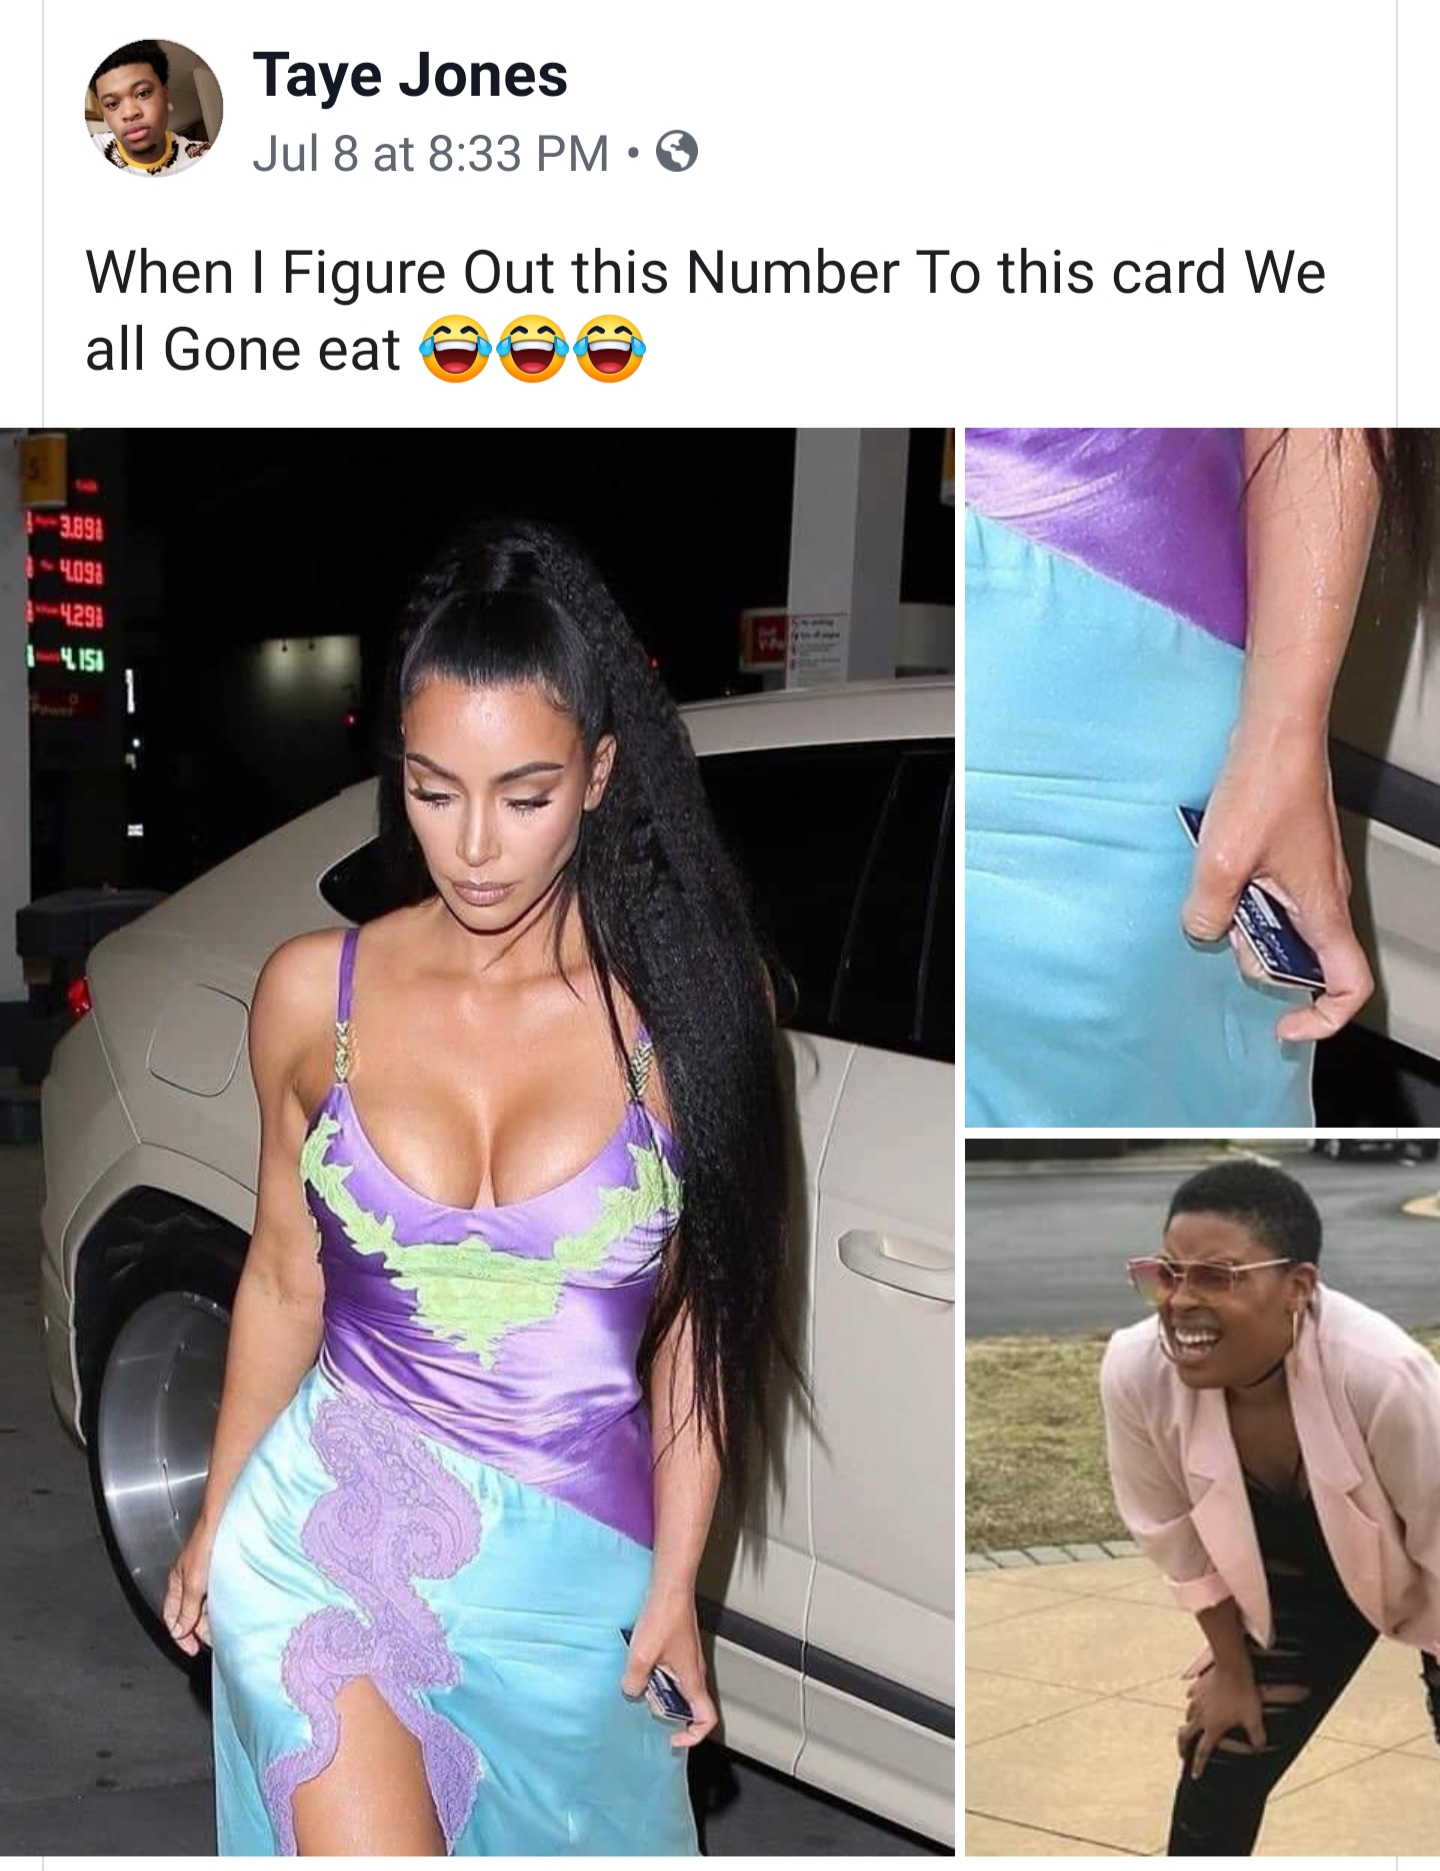 kim kardashian new car 2019 - Taye Jones Jul 8 at When I figure out this Number To this card We all Gone eat @@@